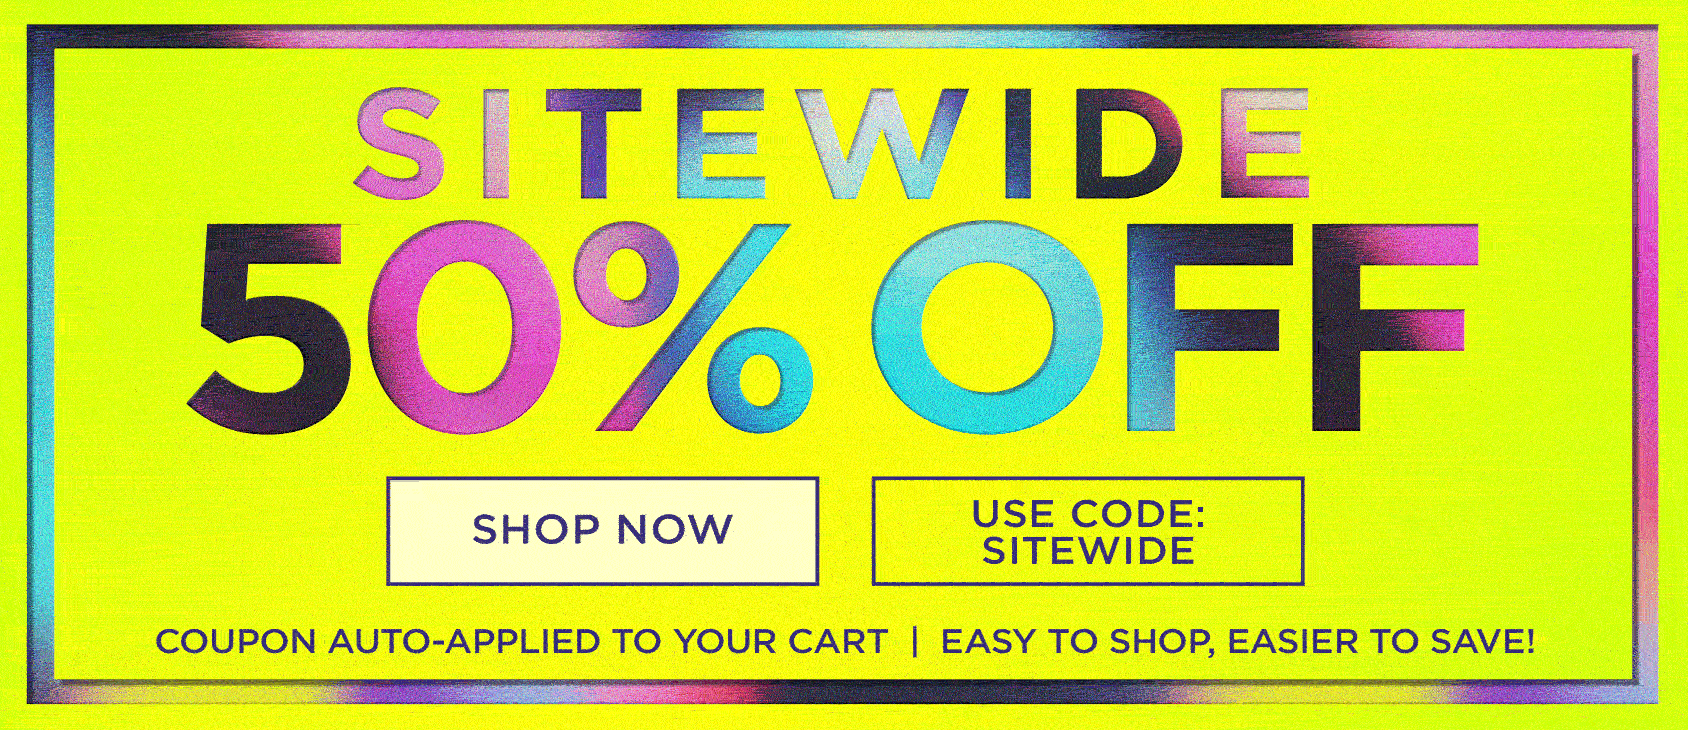 SITEWIDE 50% OFF! use code: SITEWIDE, code auto-applied to your cart